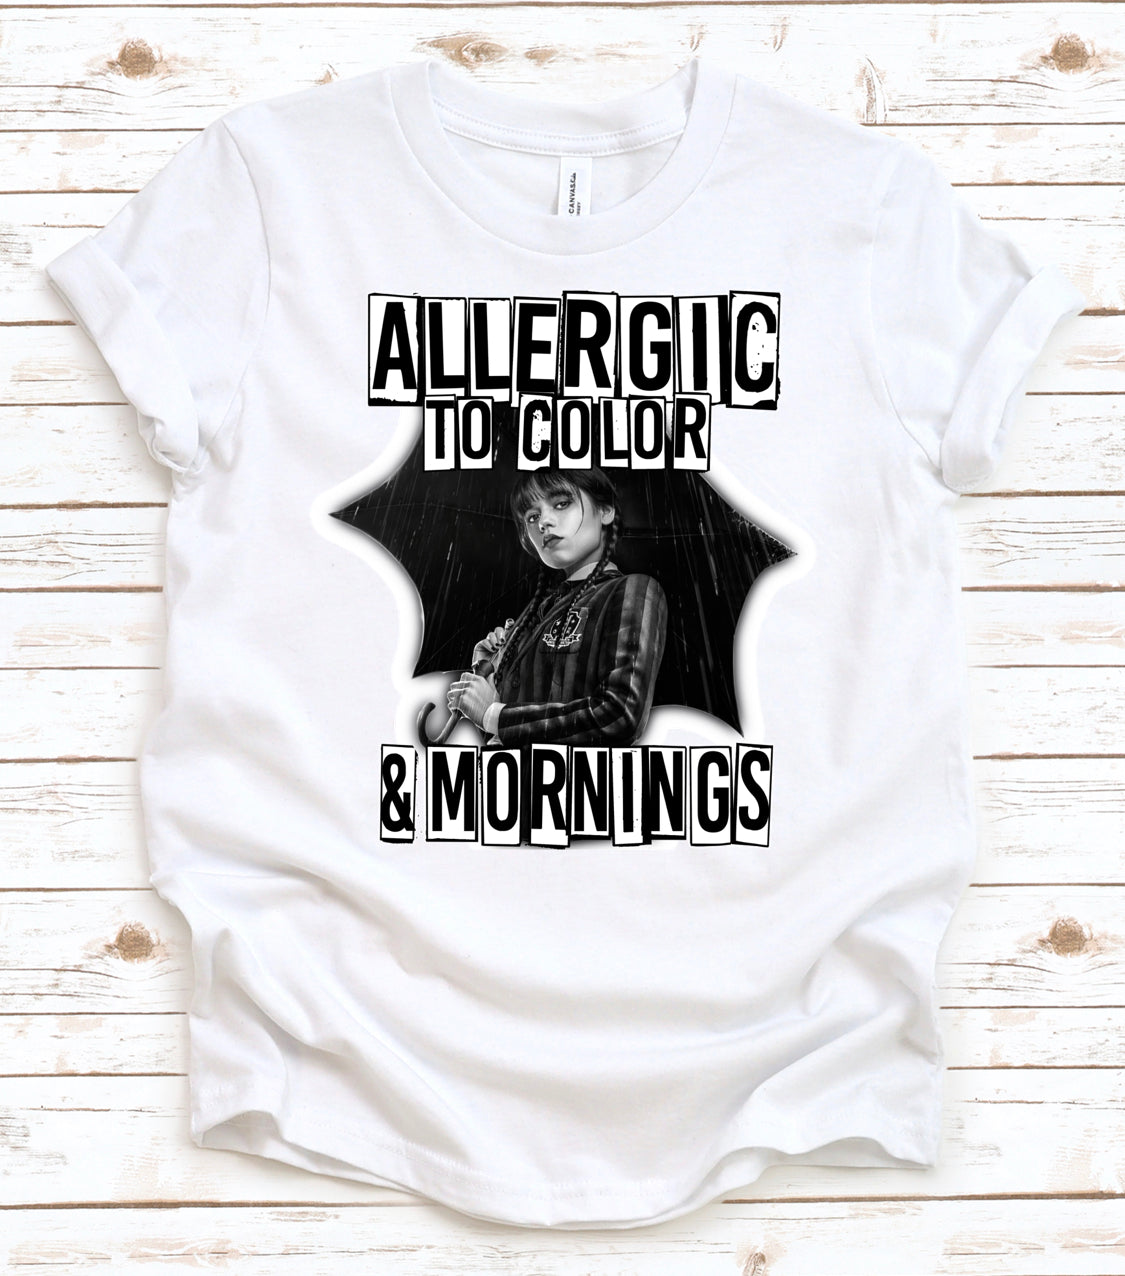 Allergic to Color and Mornings